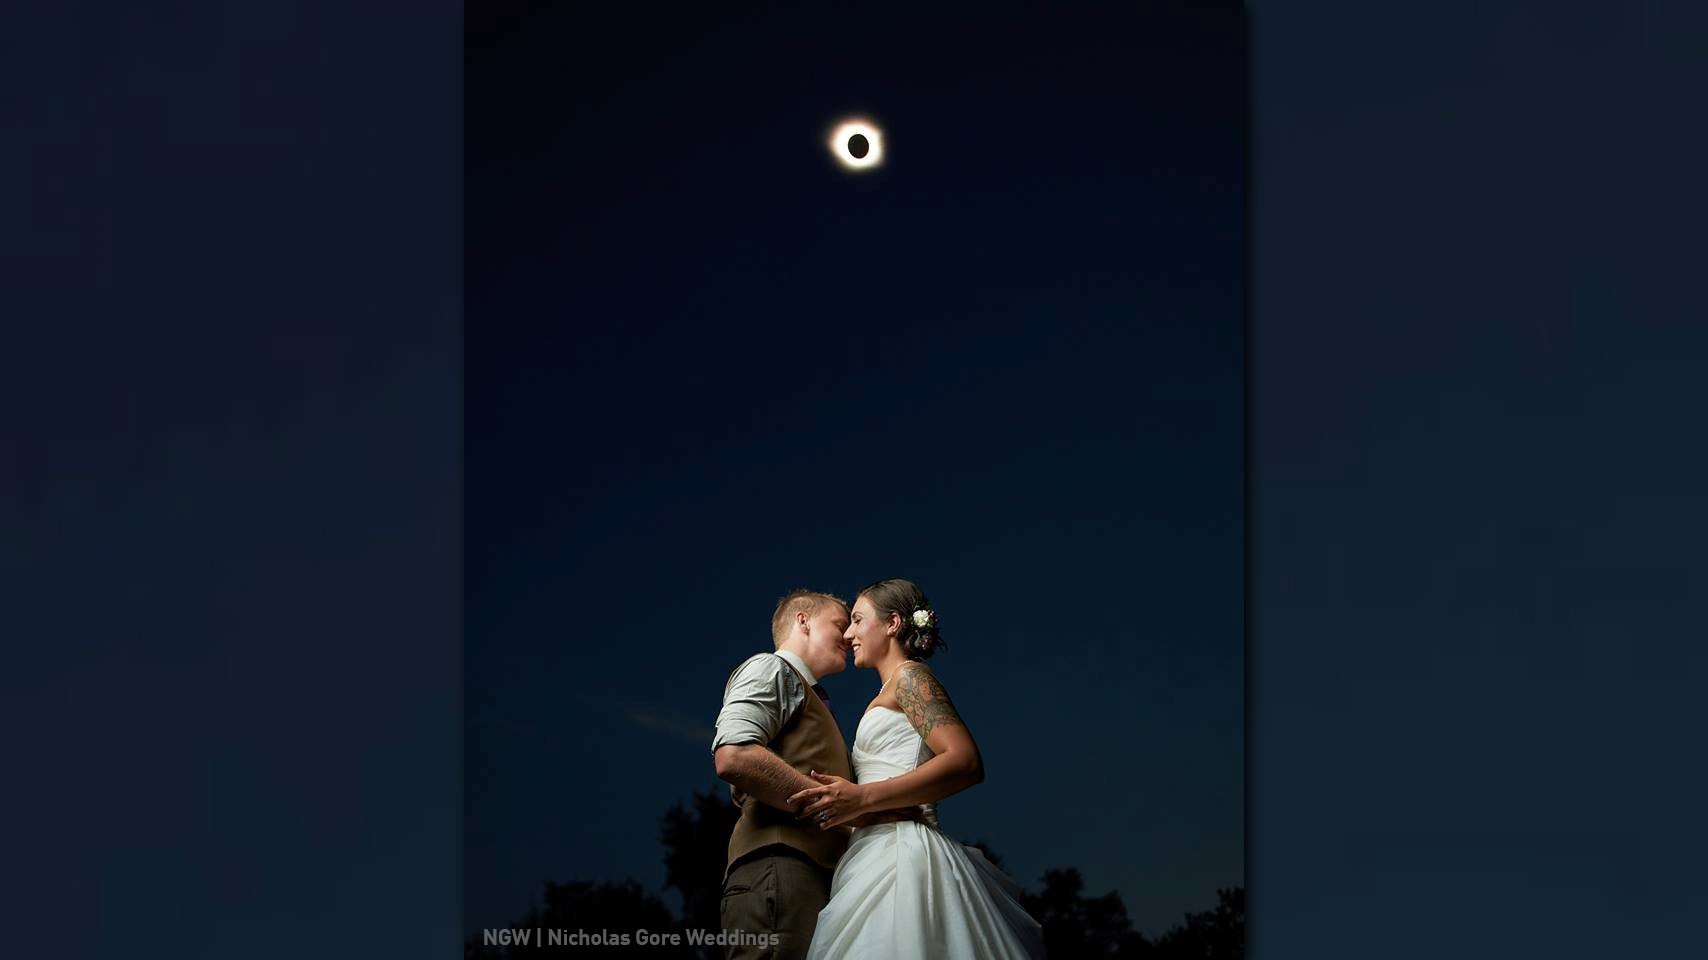 S.C. military couple married under eclipse, capture breathtaking photo